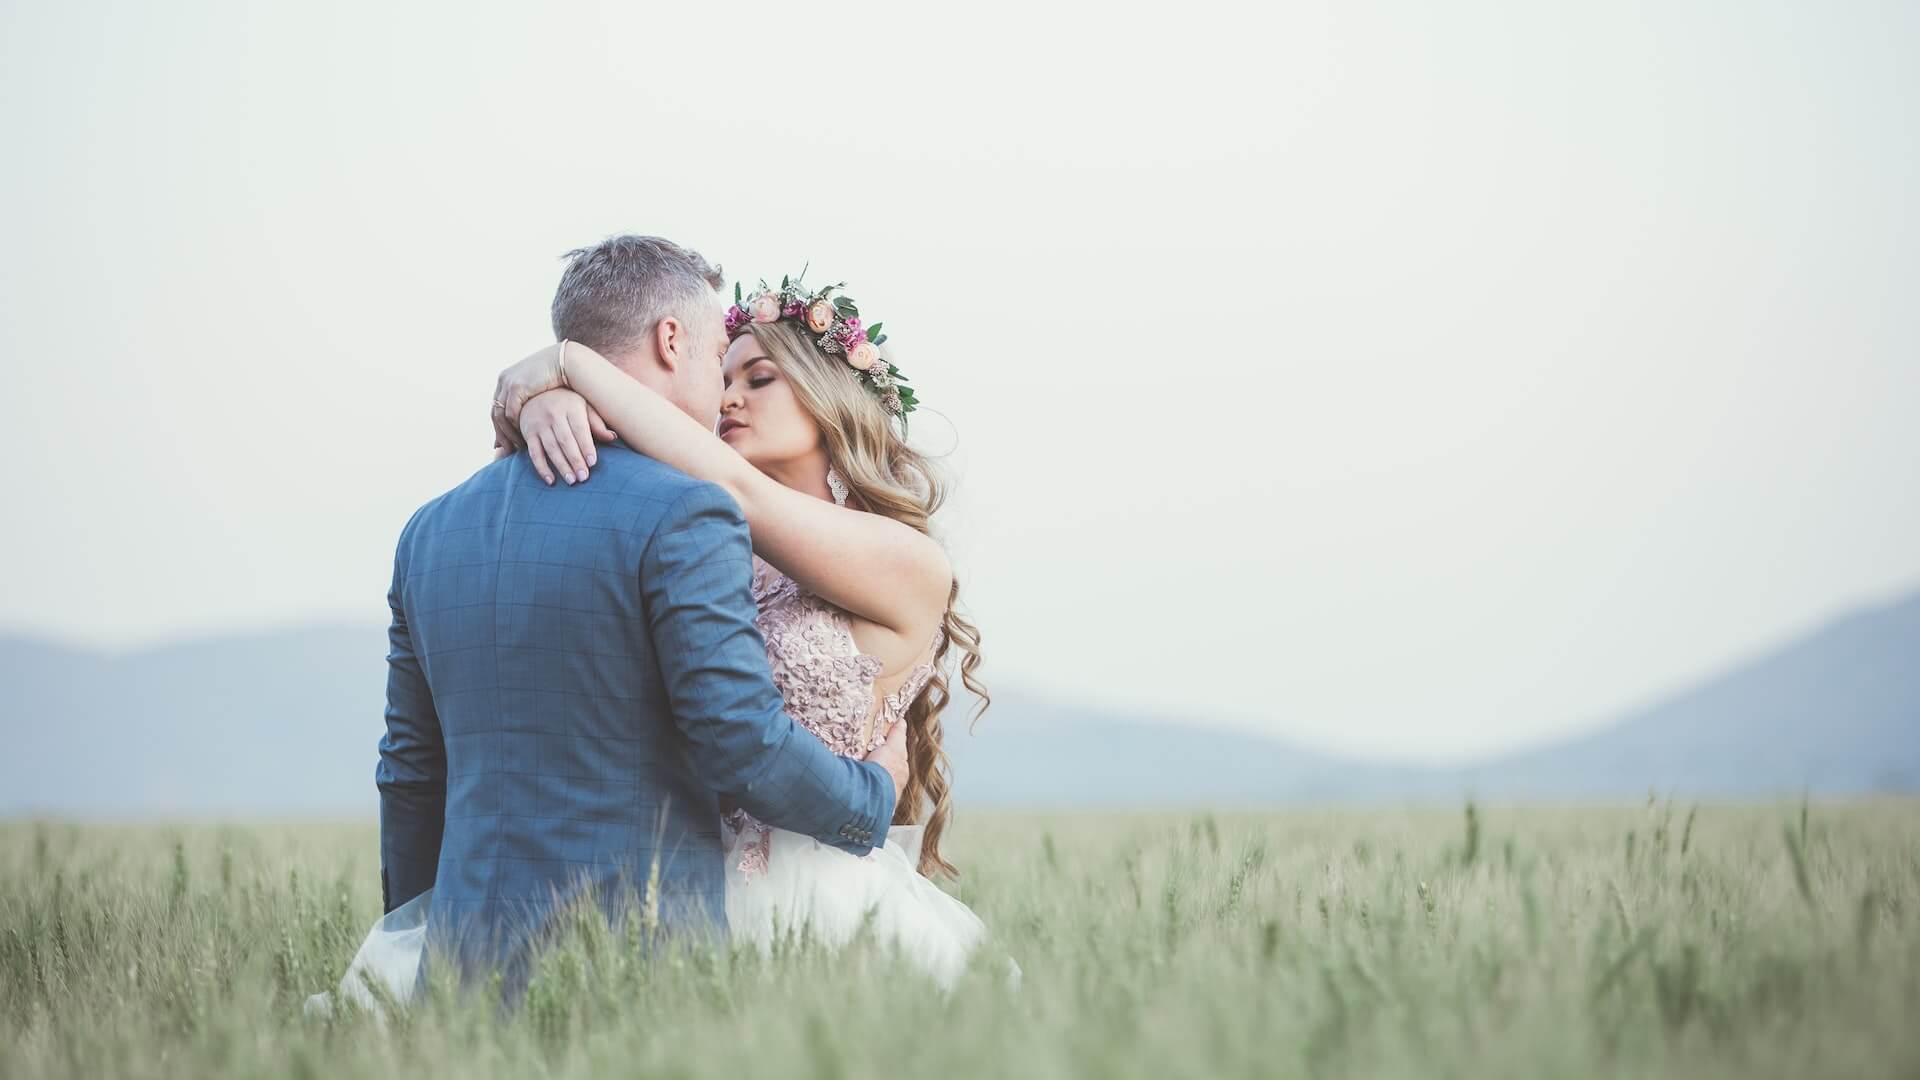 Capturing Forever: Expert Wedding Photography Tips For Picture-Perfect Memories